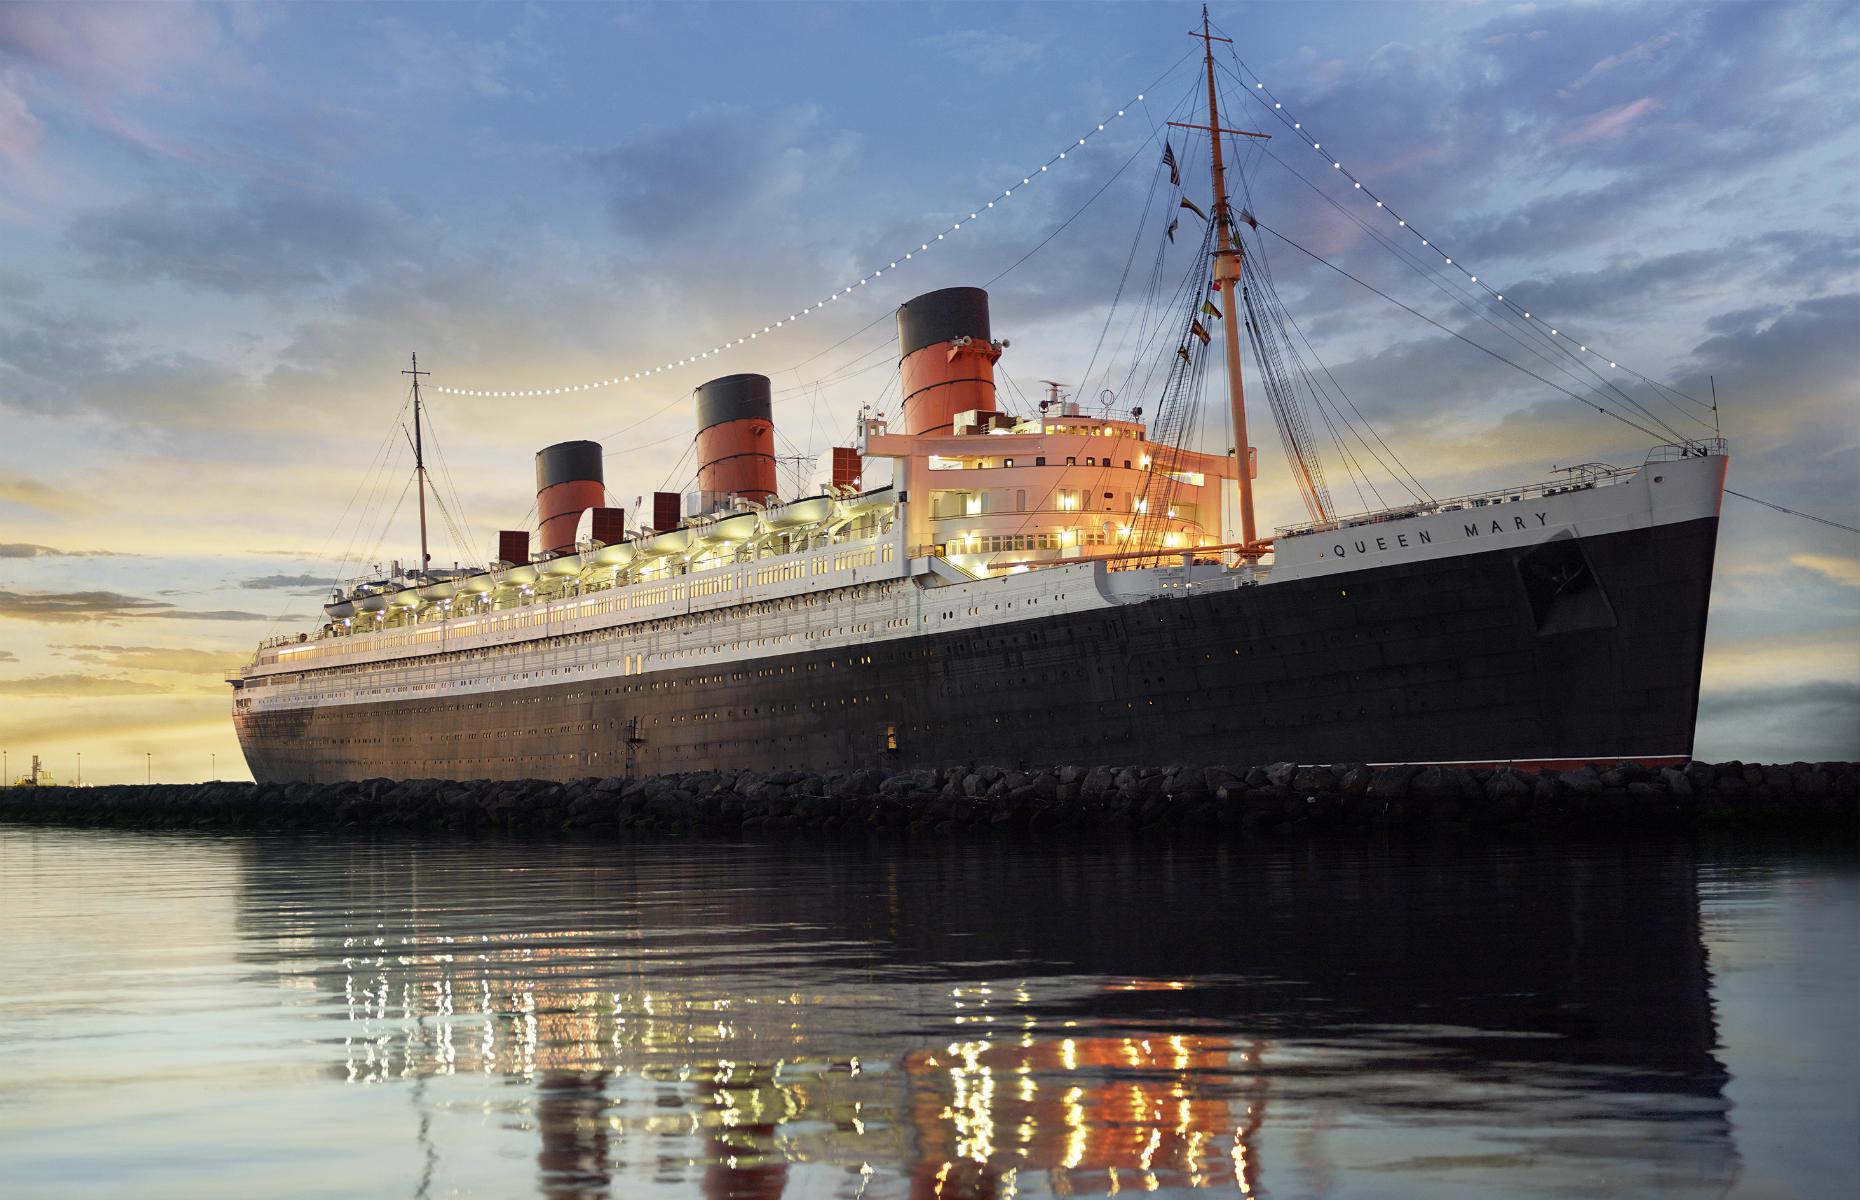 <p>She continued her life of glamour permanently moored in Los Angeles’ Long Beach as <a href="https://queenmary.com/">a hotel and attraction</a>. You can stay in one of its many gorgeous Art Deco staterooms, visit for the day or even take advantage of the onboard spa.</p>